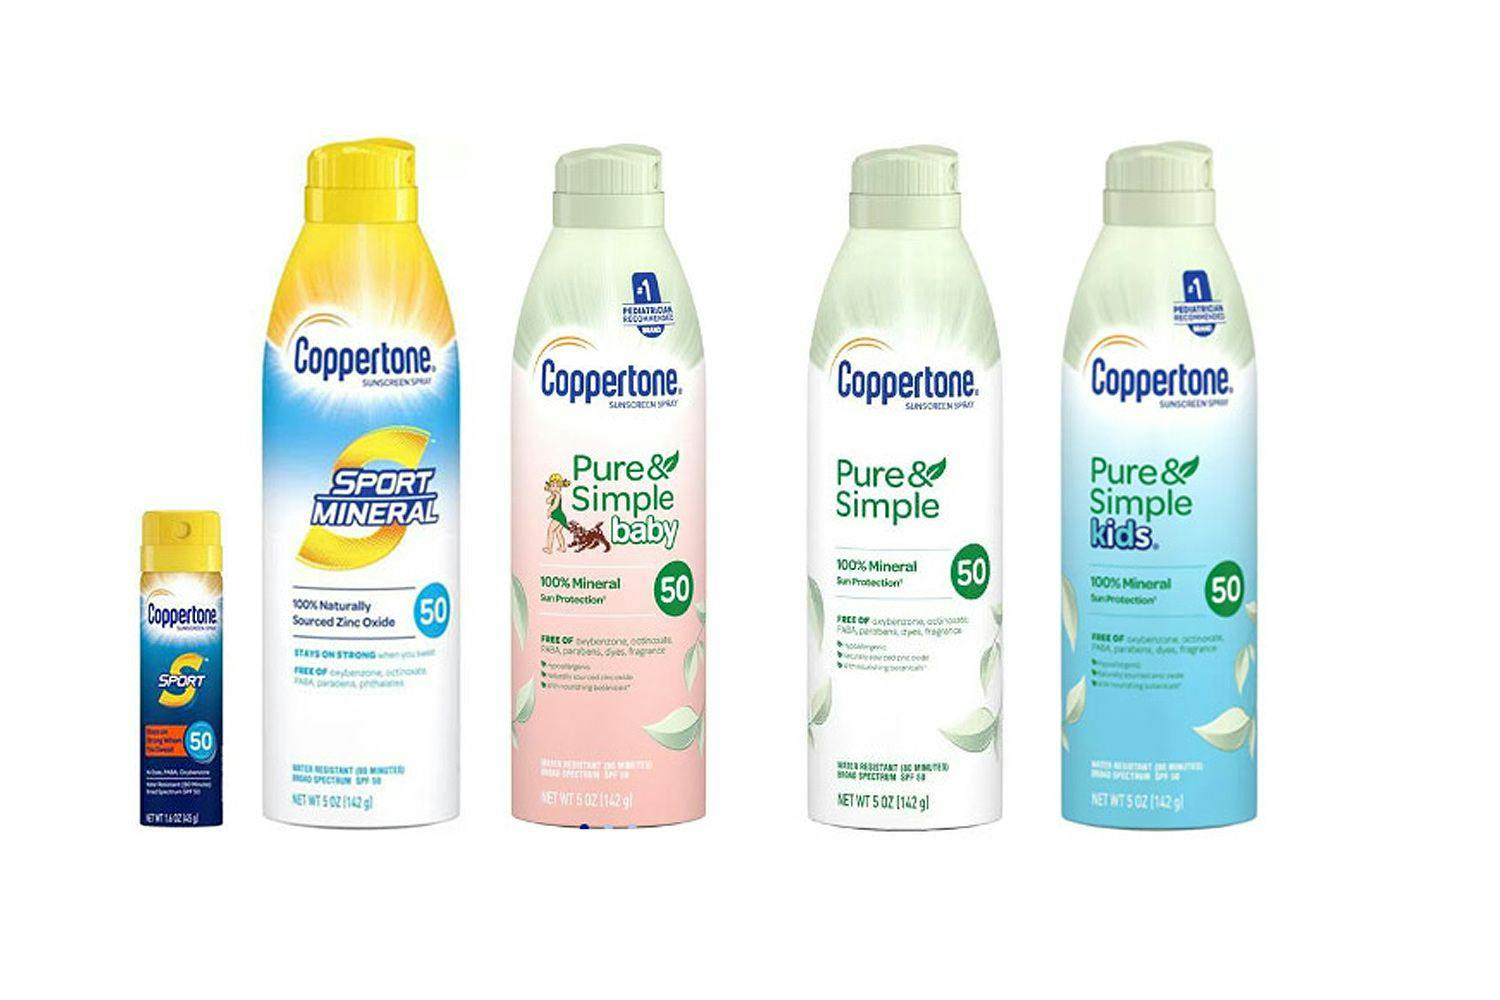 Affected Coppertone products